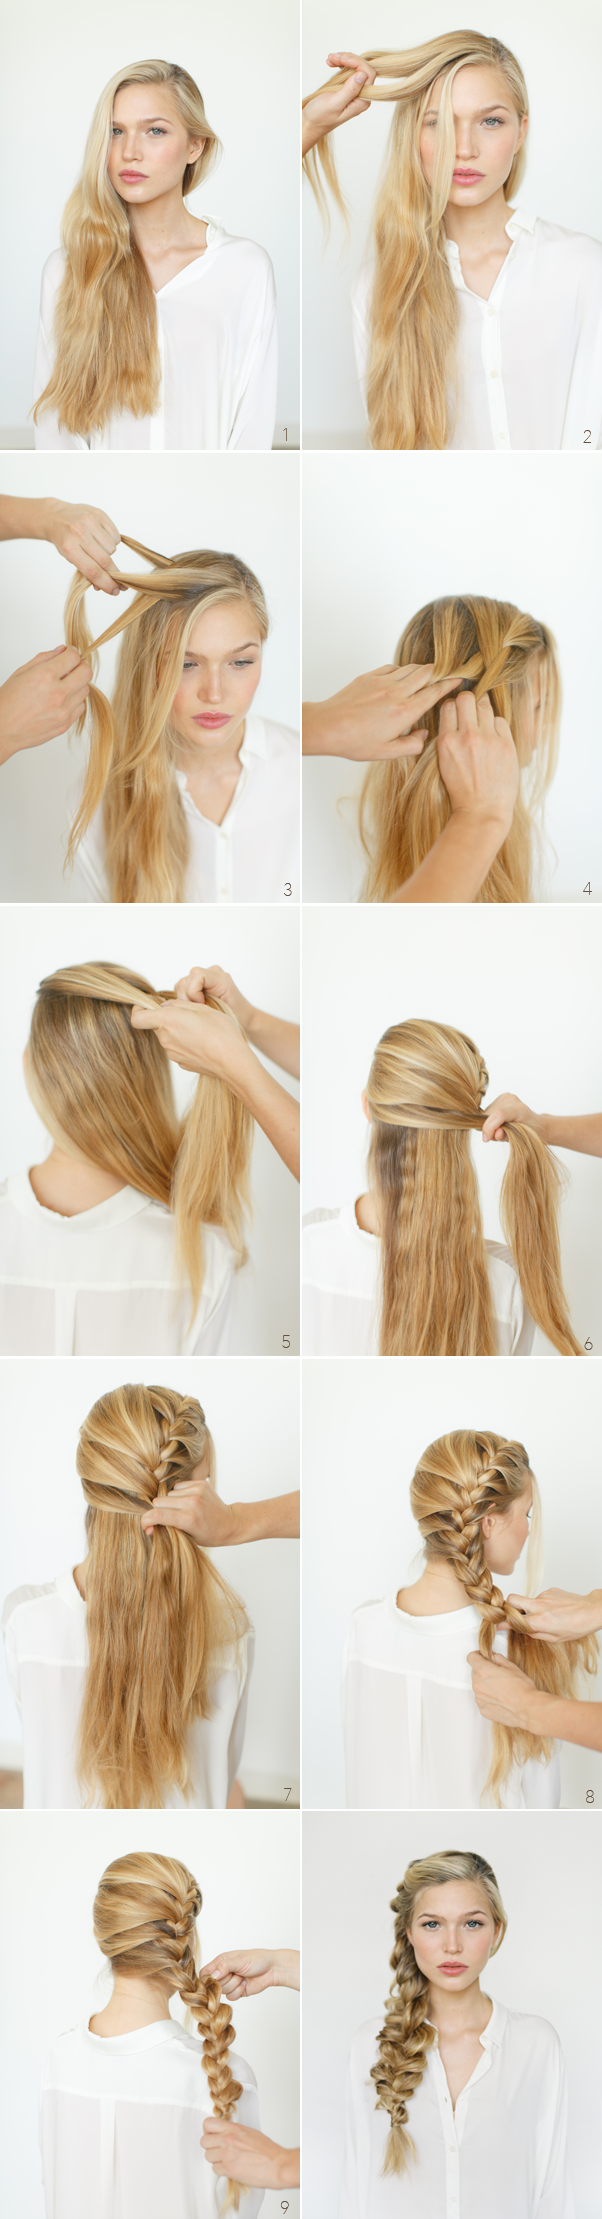 17-Romantic-Hairstyle-Ideas-and-Tutorials-2